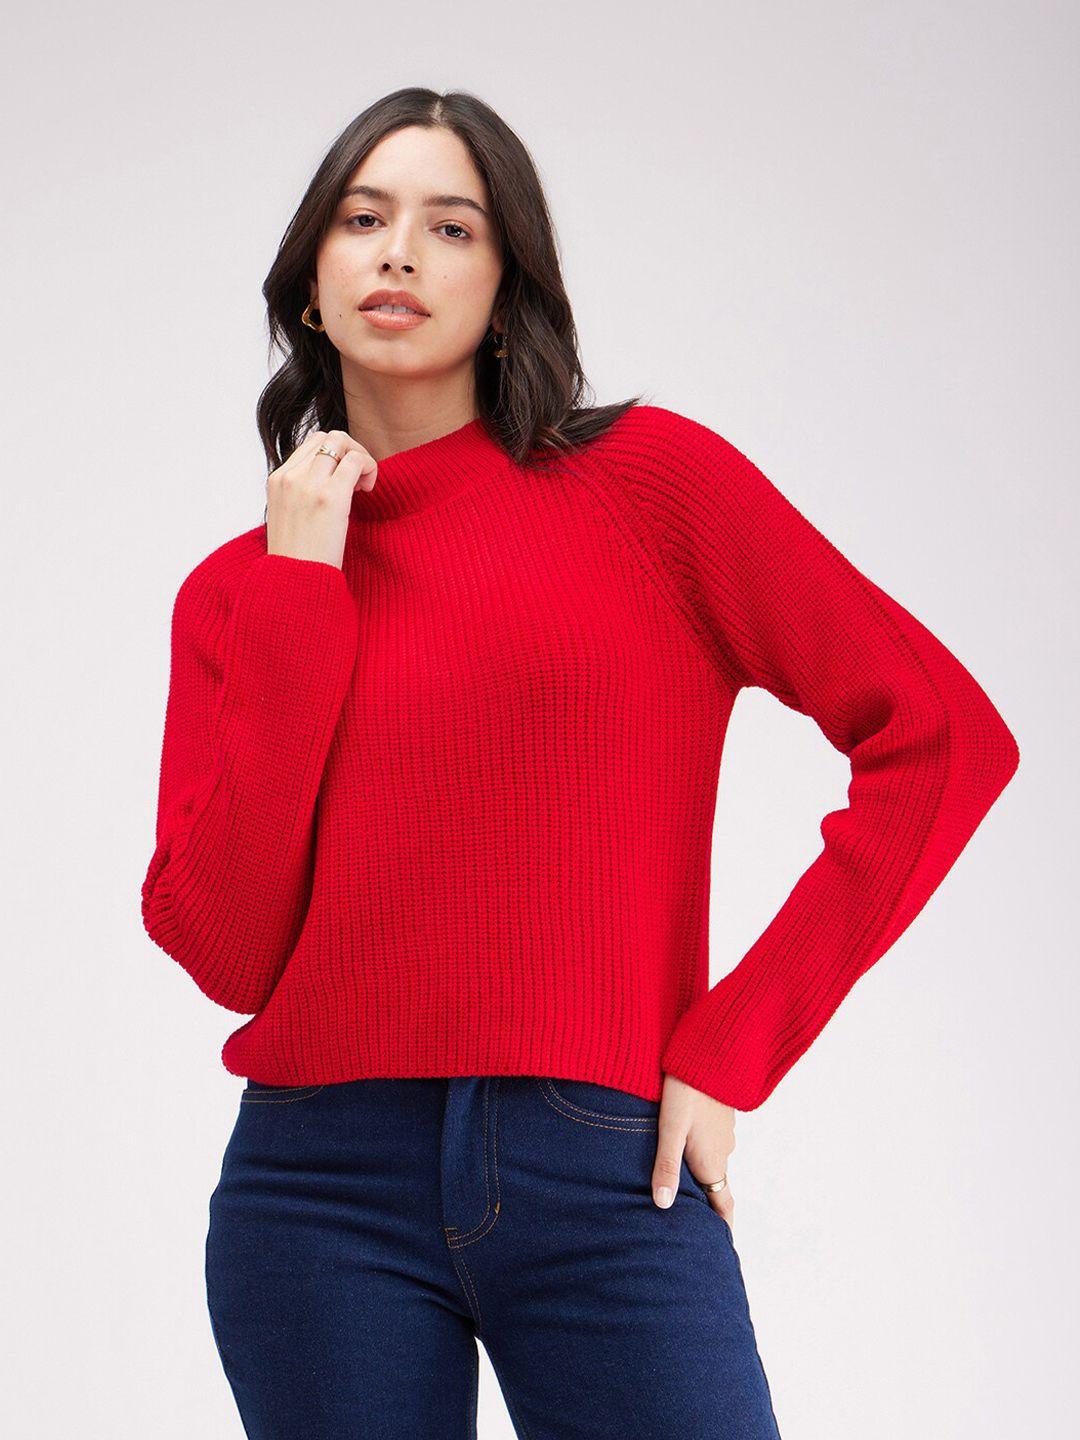 fablestreet cable knit acrylic pullover sweater